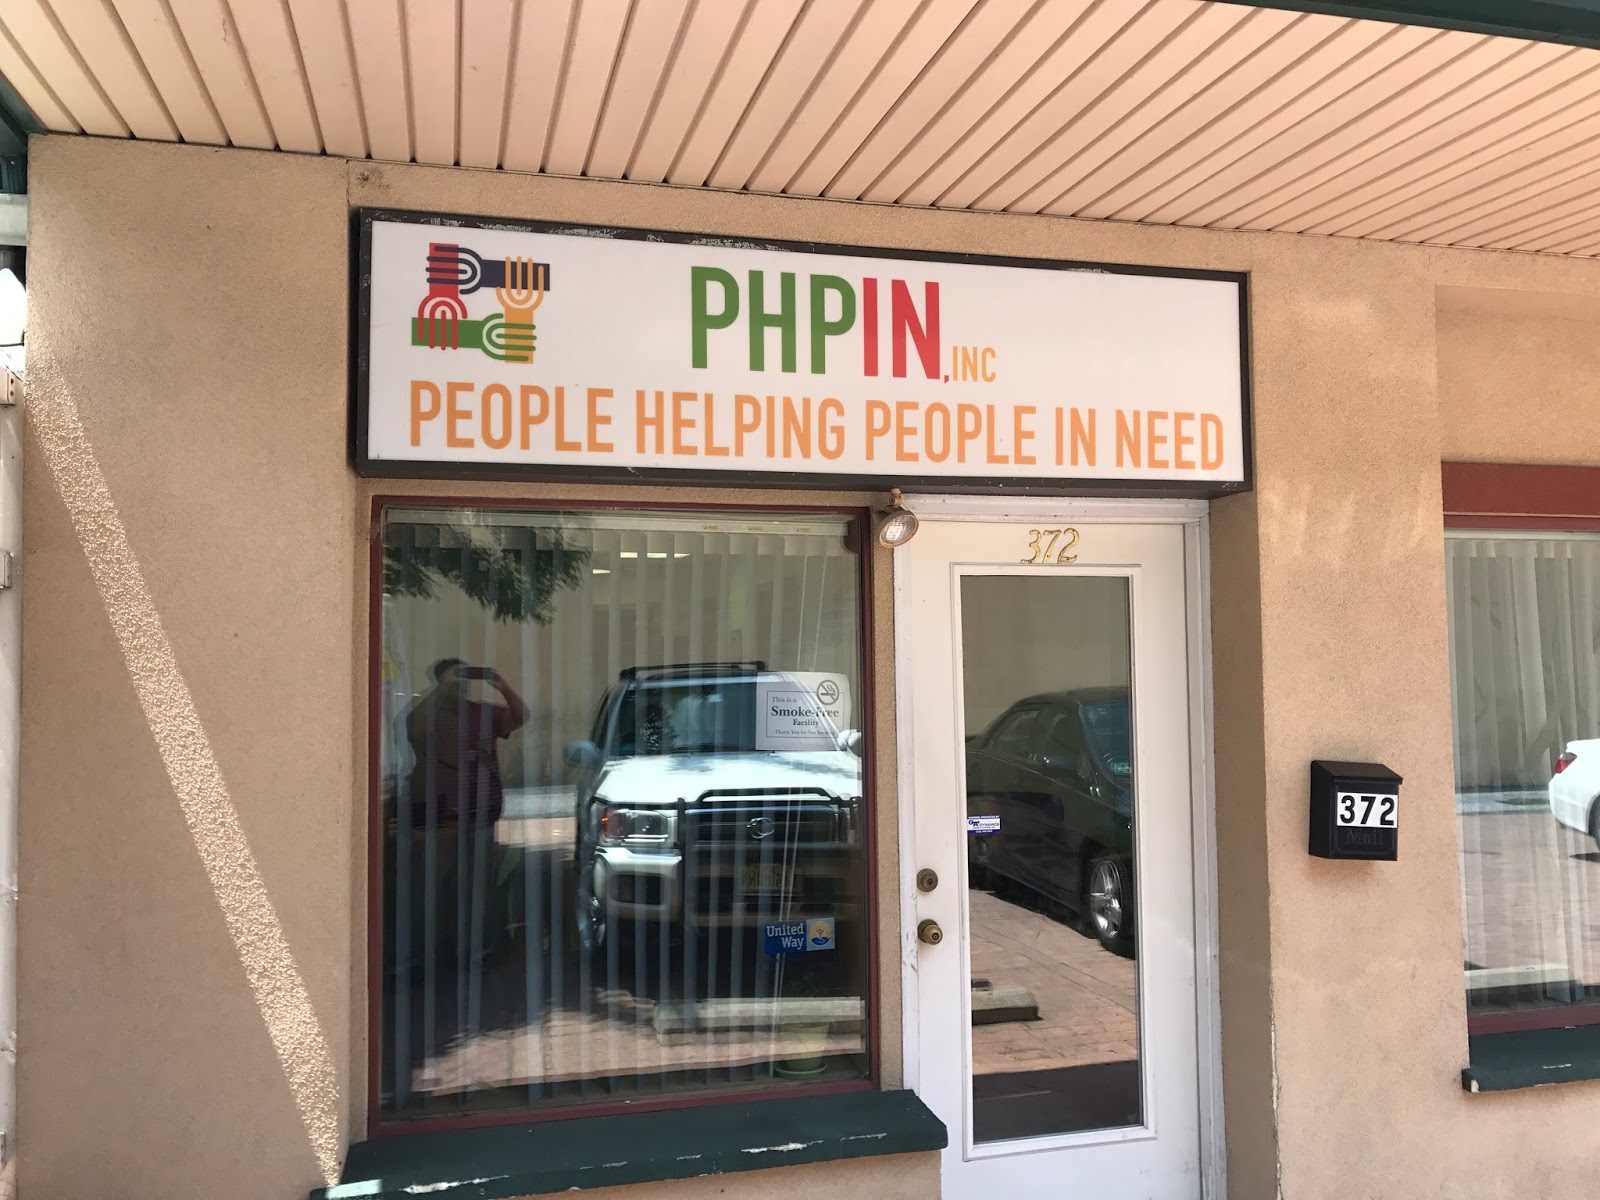 People Helping People In Need - PHPIN